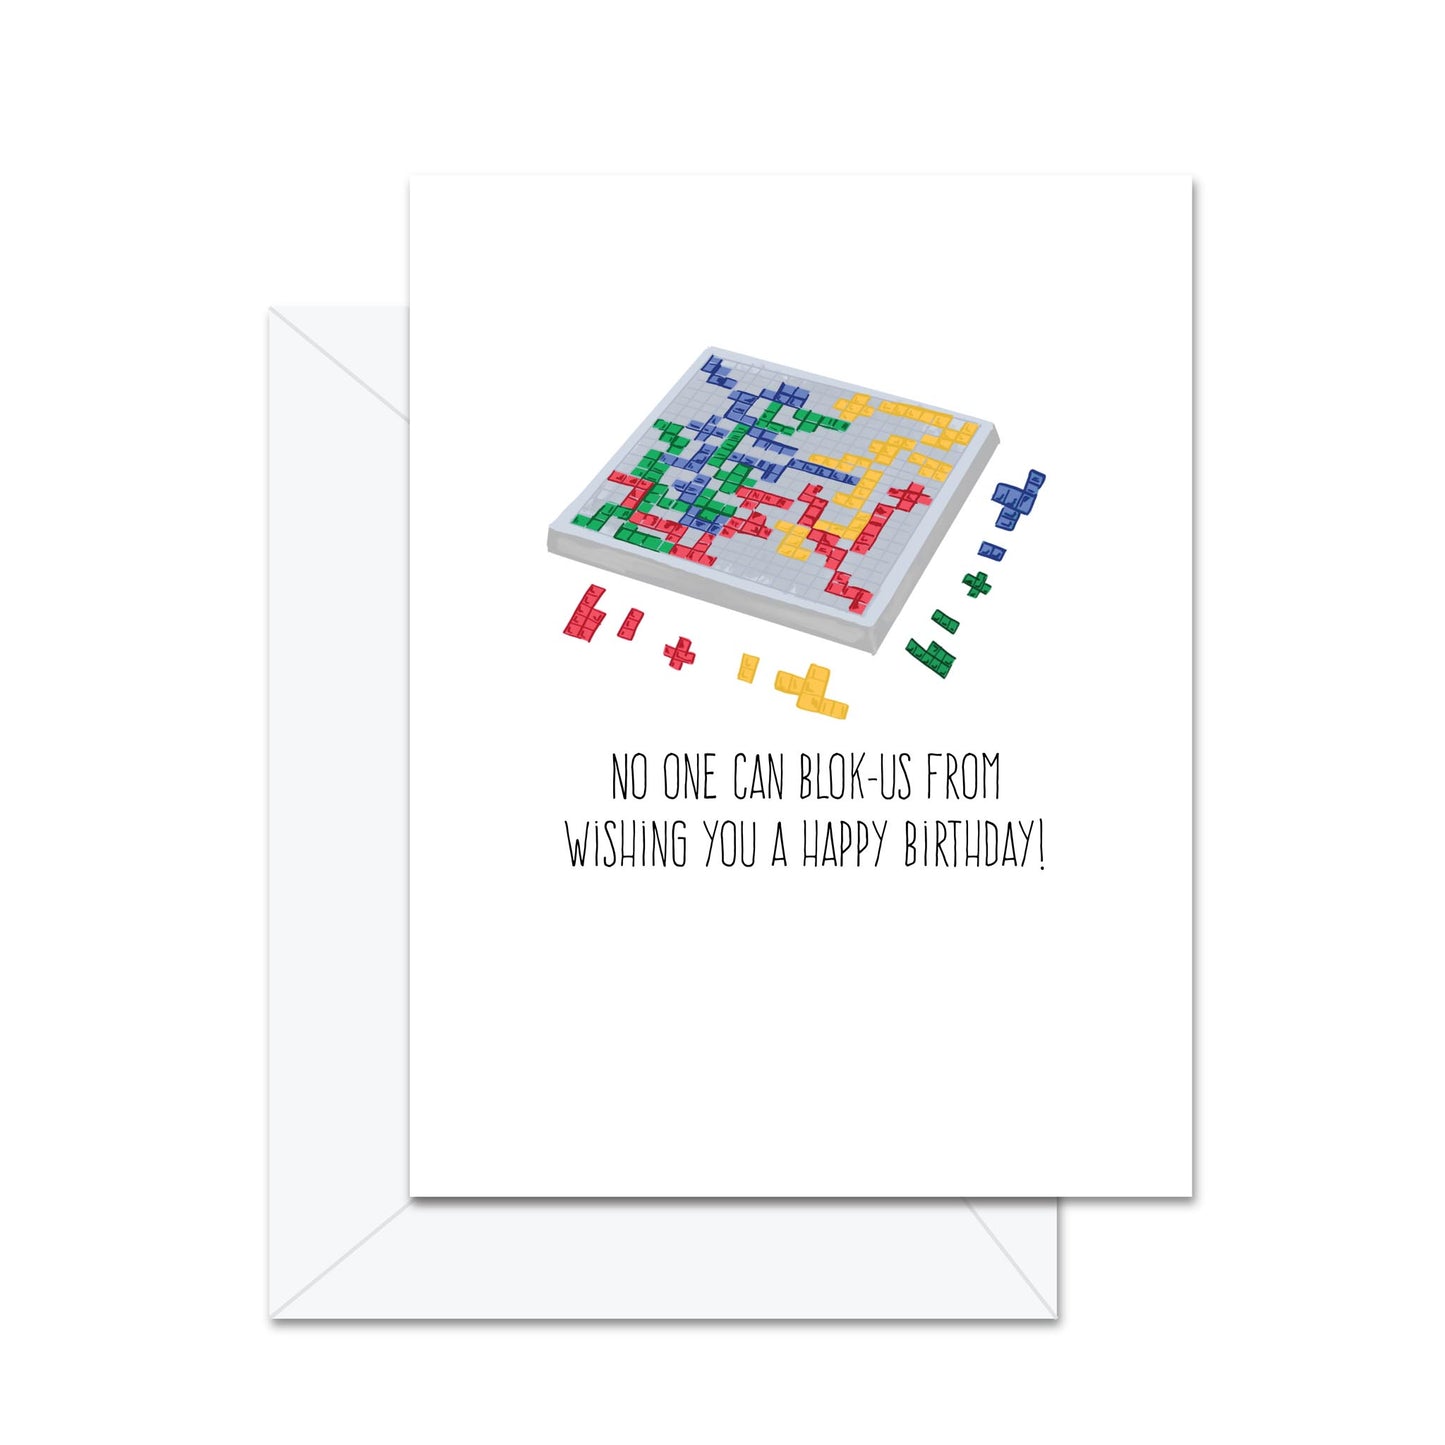 No One Can Blok-us From Wishing You A Happy Birthday! - Birthday Greeting Card